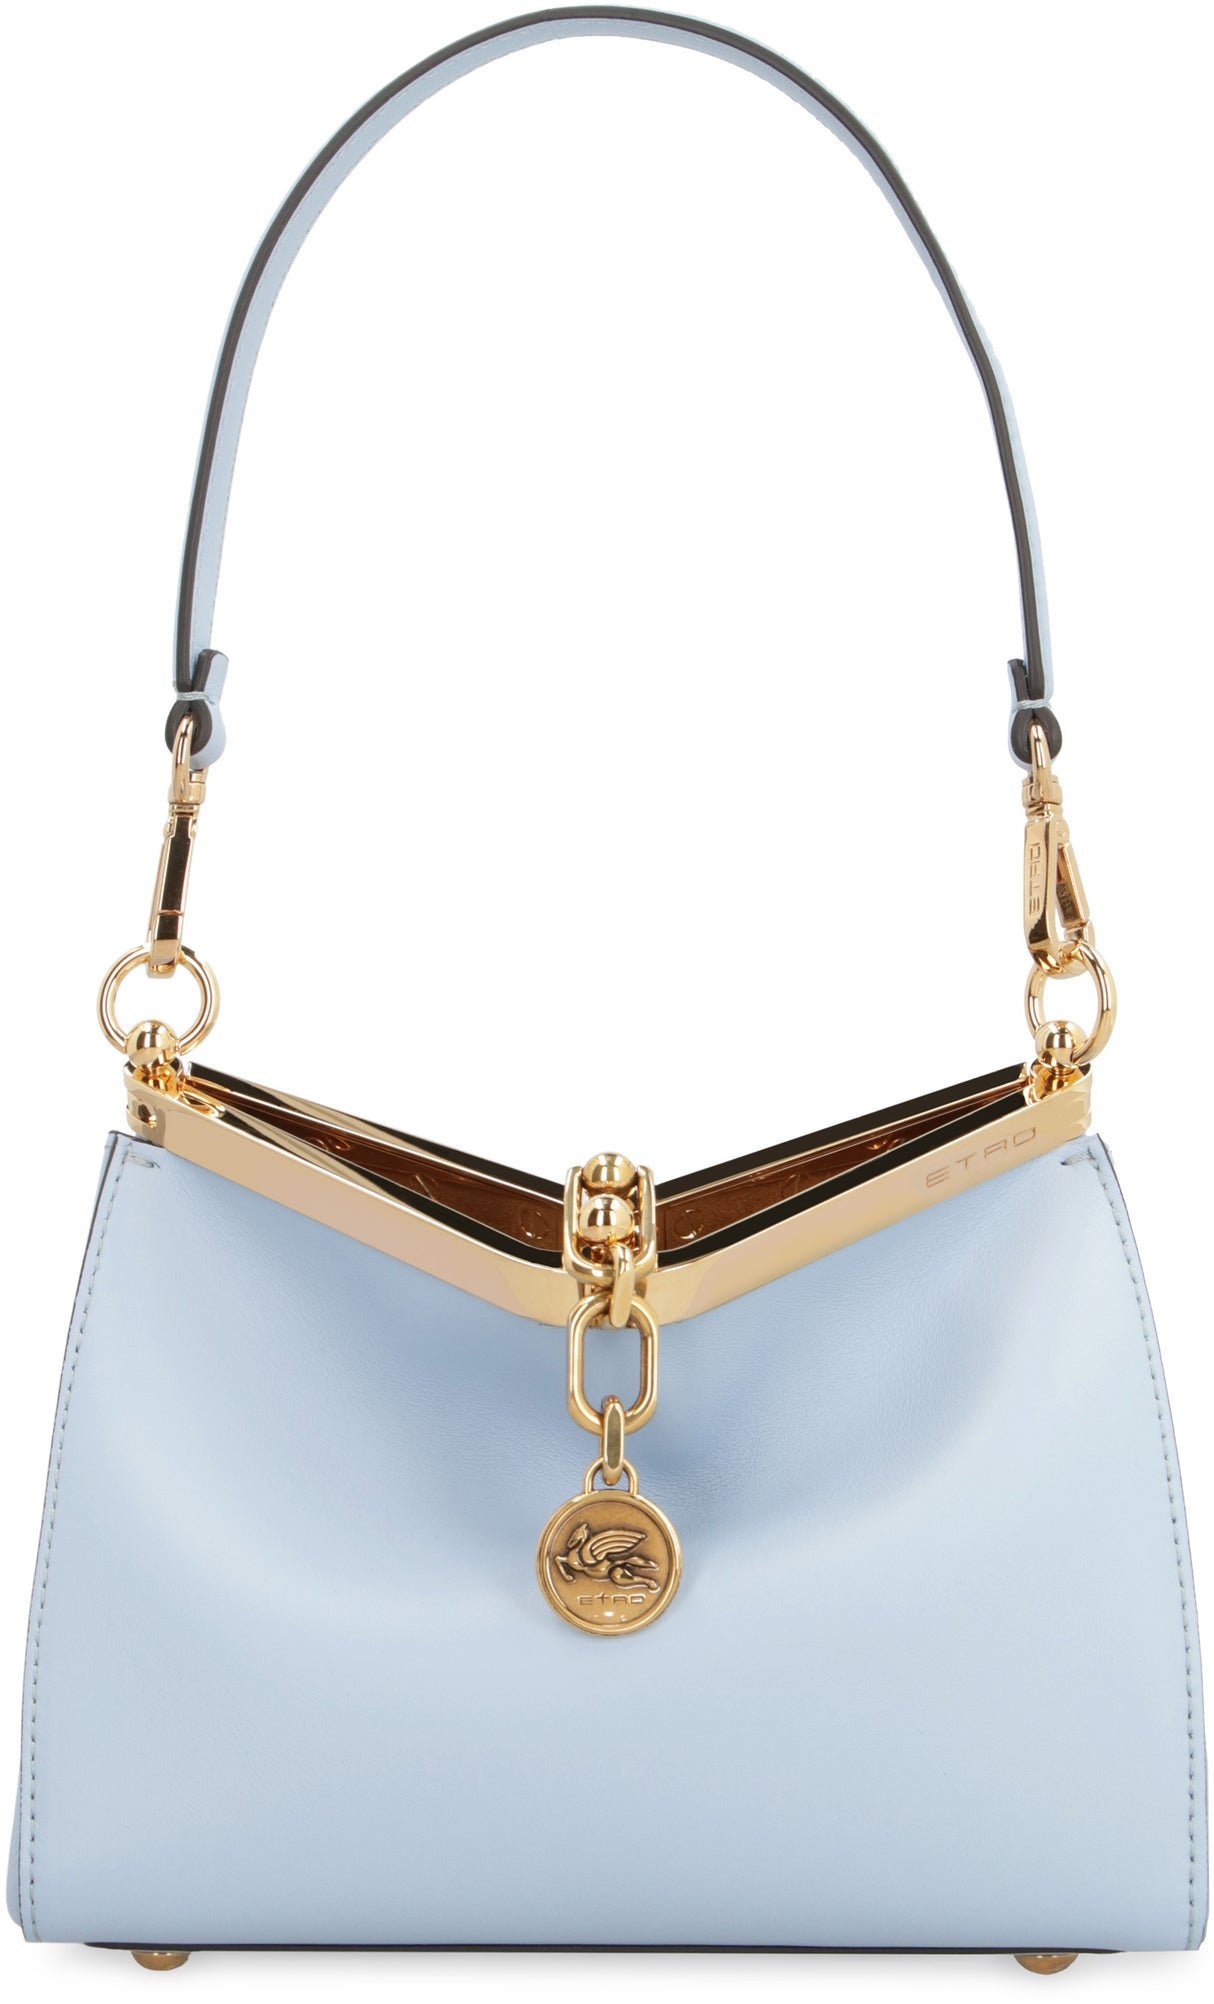 ETRO Chic Mini Leather Shoulder Bag in Light Blue with Gold-Tone Accents - 21x16x9 cm